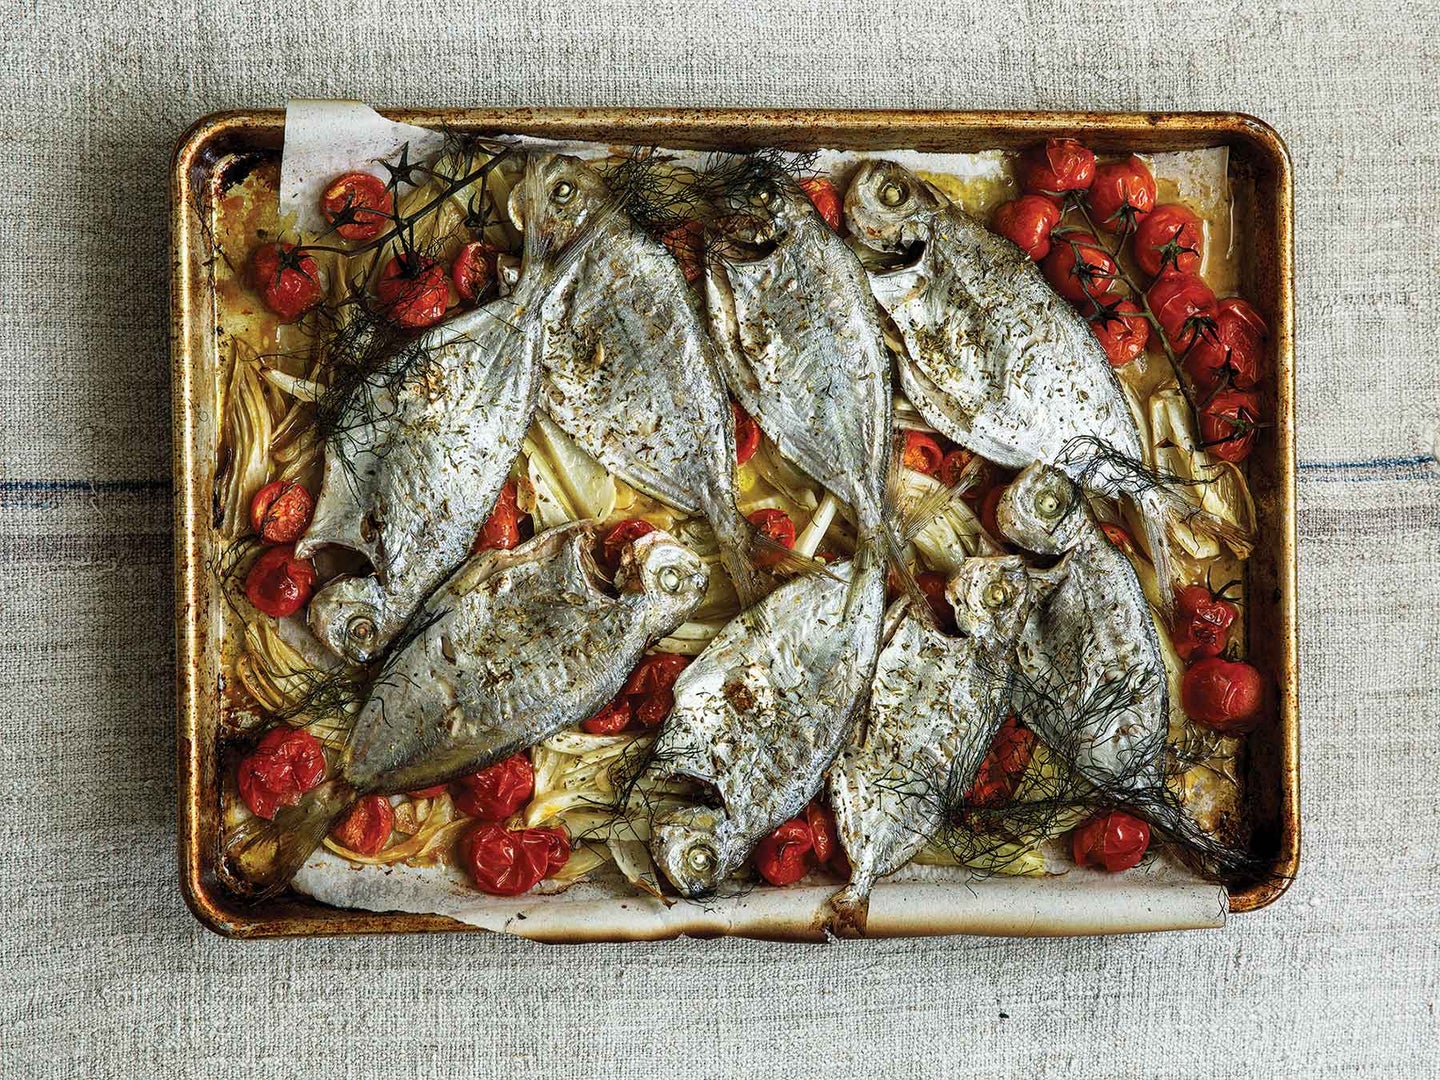 Oven-roasted Atlantic butterfish with fennel and tomato